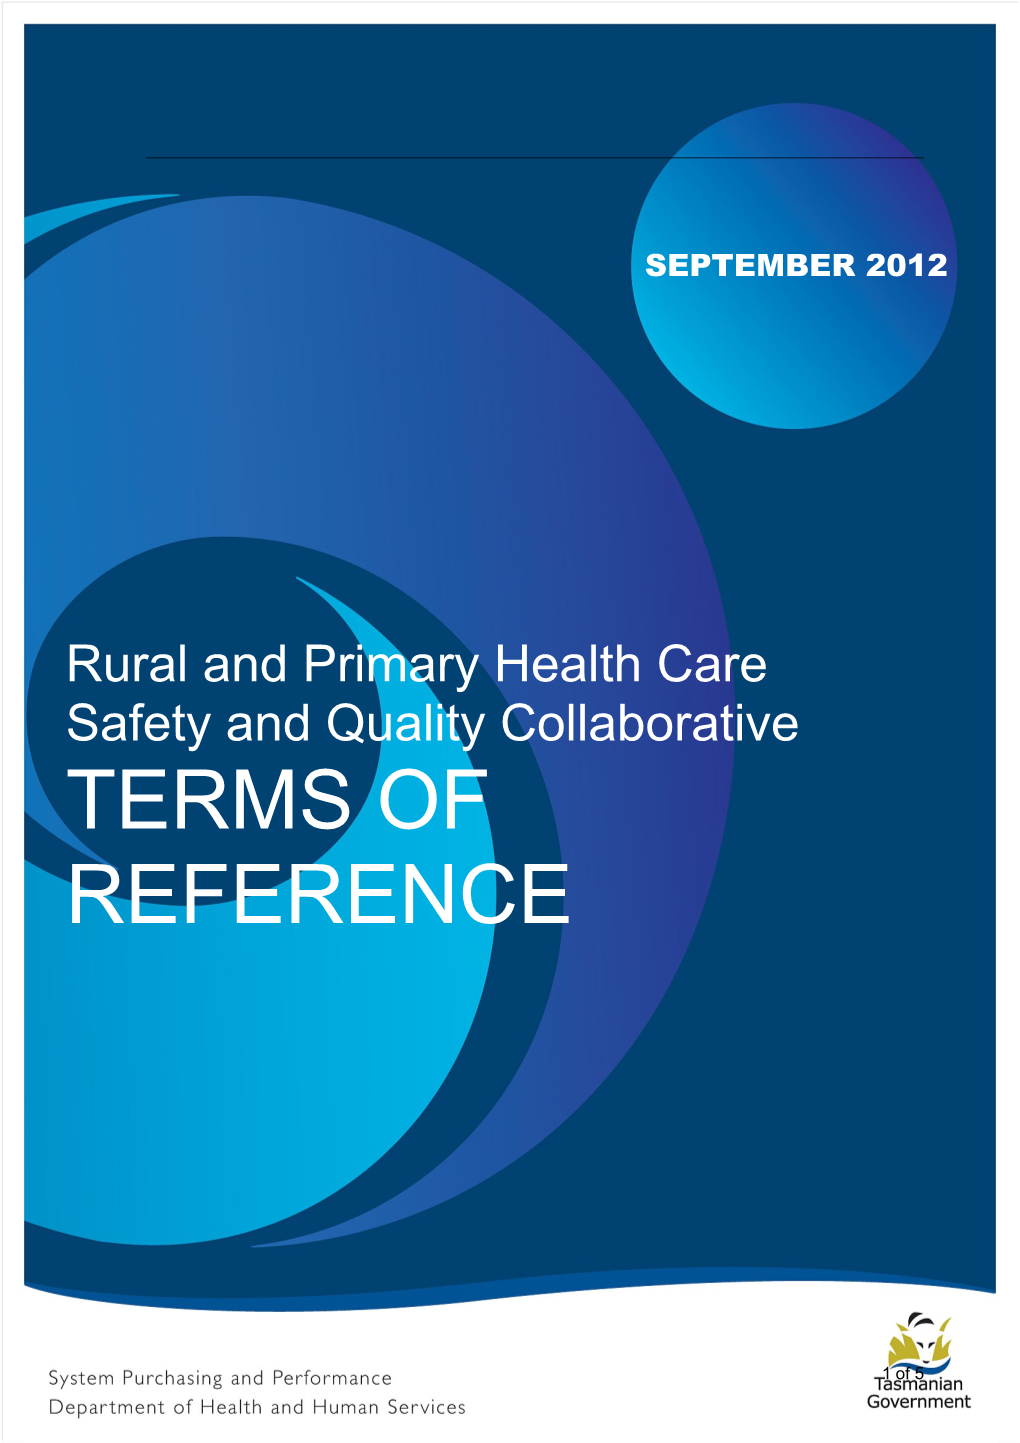 Rural and Primary Health Care Safety and Quality Collaborative Terms of Reference